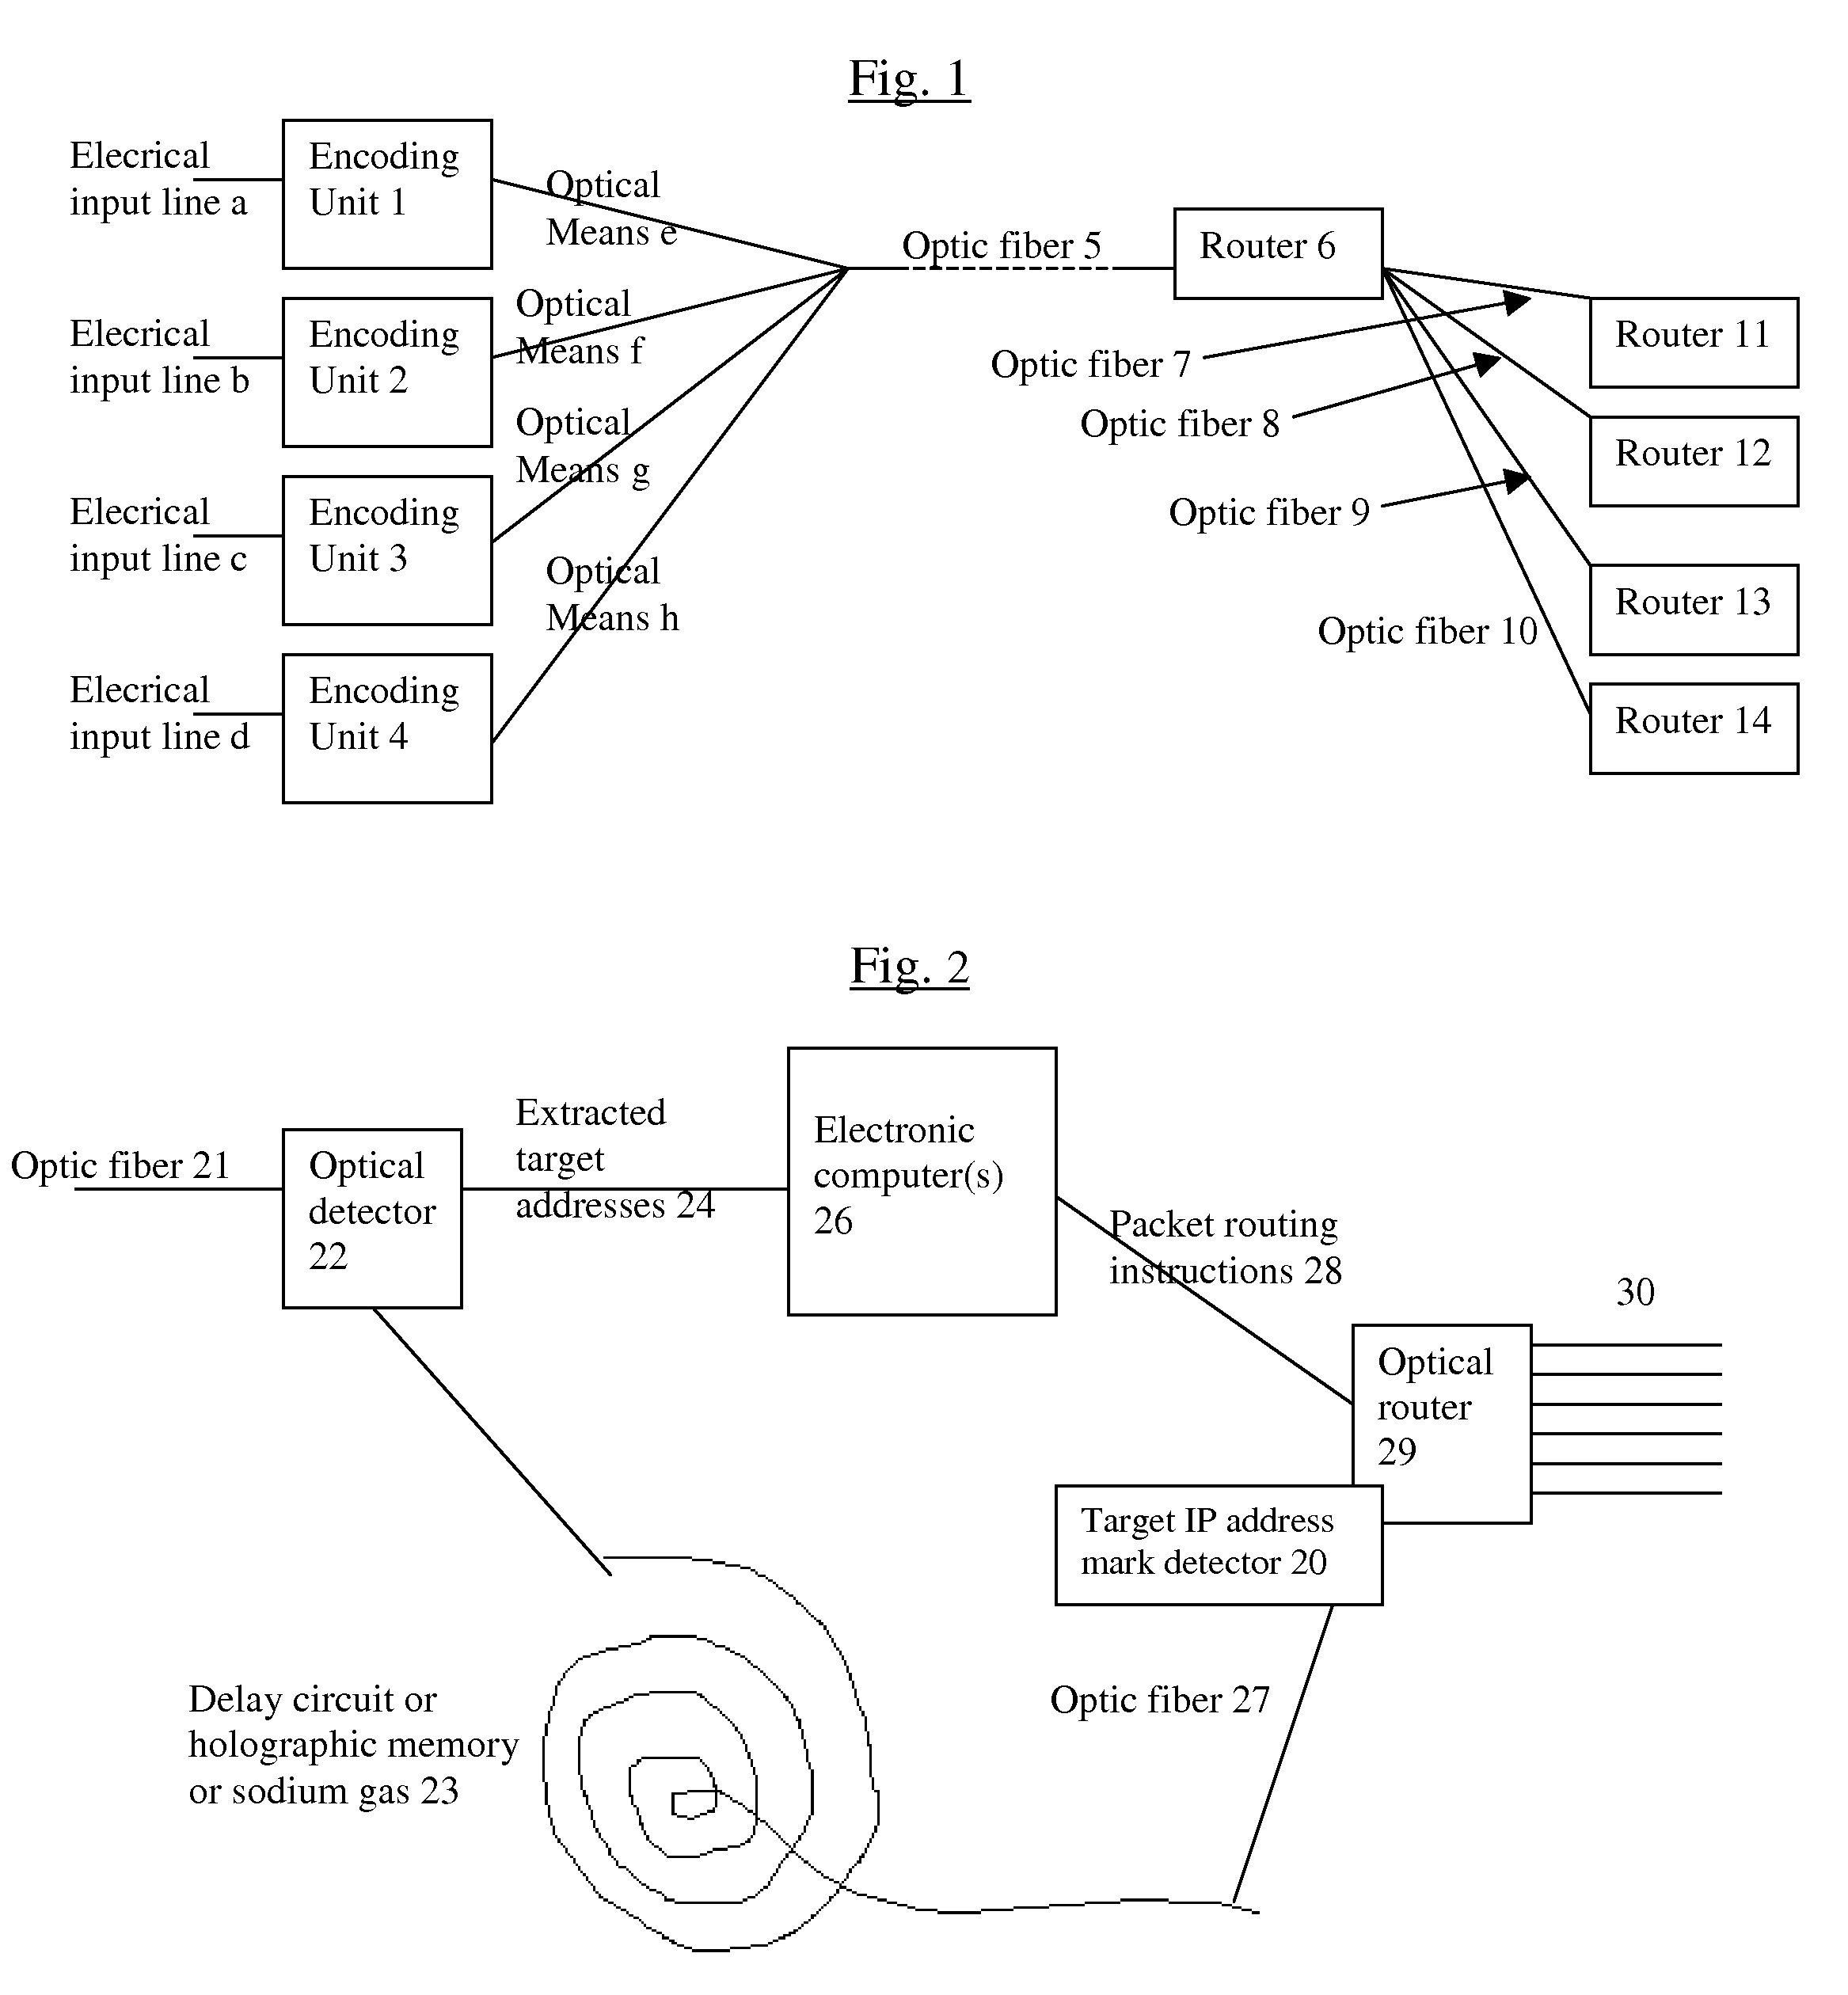 System and method for improving the efficiency of routers on the internet and/or cellular networks and/or other networks and alleviating bottlenecks and overloads on the network